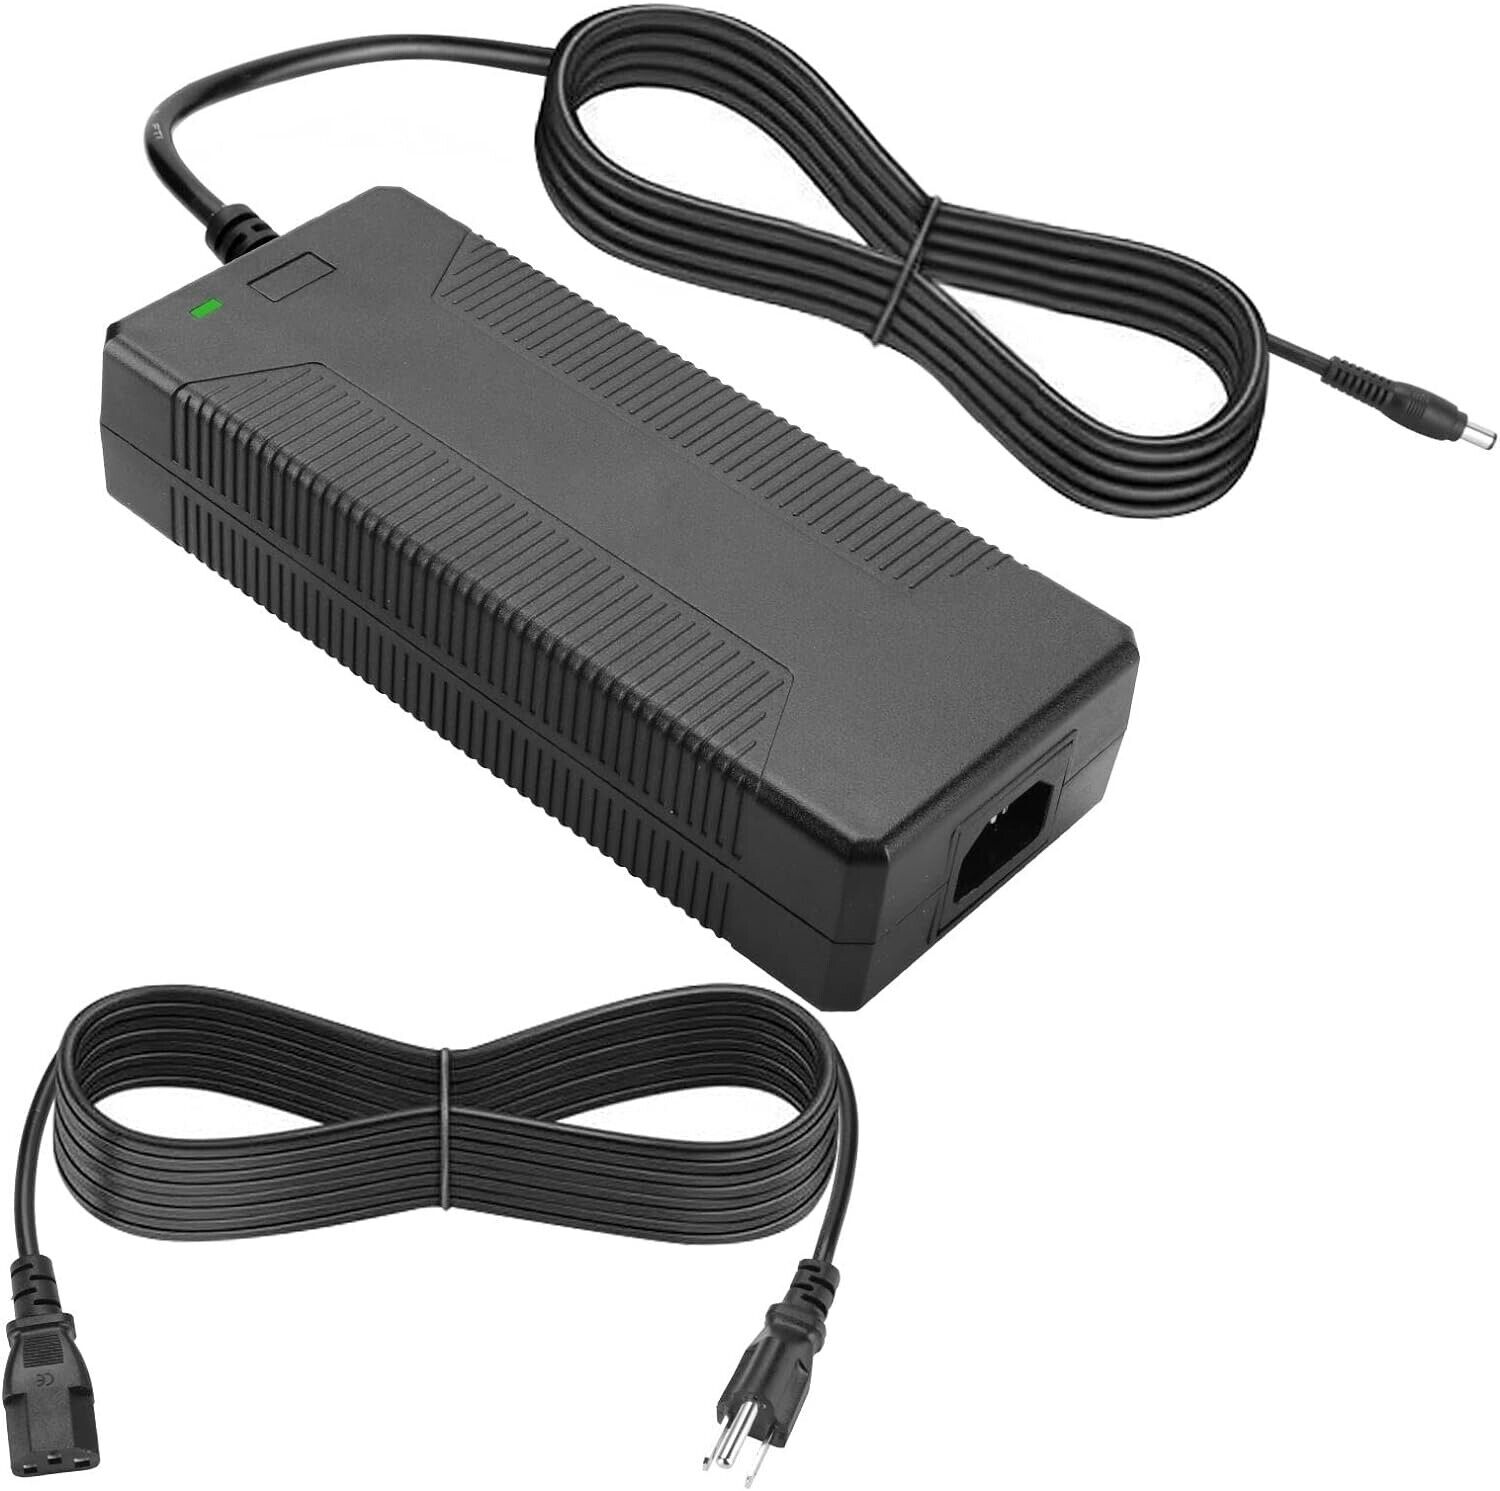 Power Adapter for Drobo Power Supply for droboS 5D, 5Dt, 5N2, 5C, and 5D3 Models